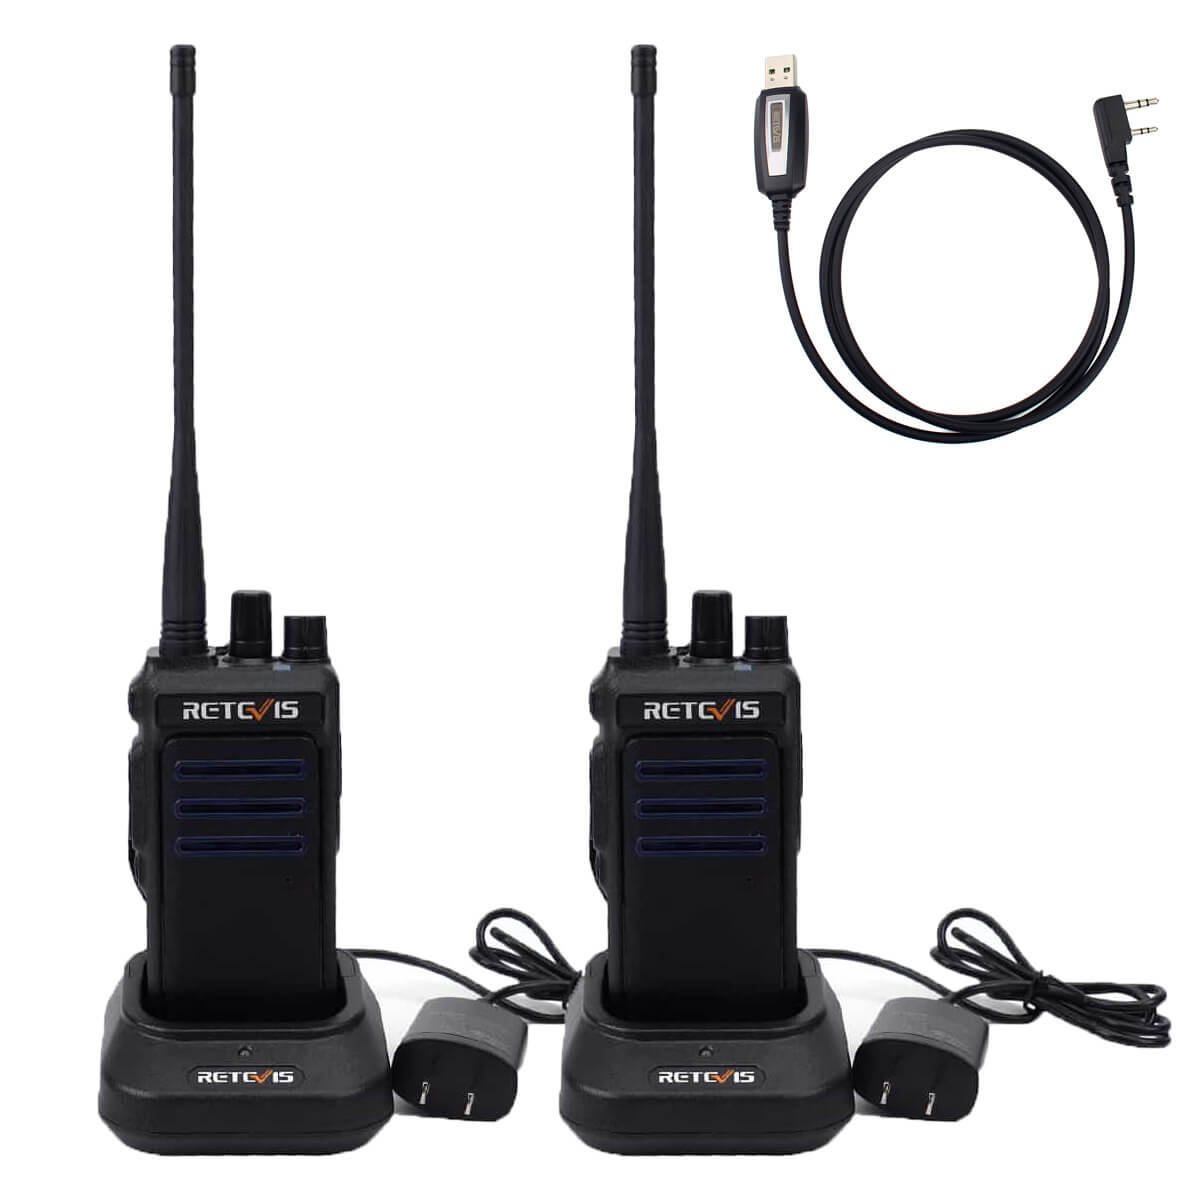 https://www.retevissolutions.com/Assets/ProductImages/A/a9212ax2-c9034ax2-c9018a/2Pack-RT10-900MHz-Radio-with-Cable-1.jpg